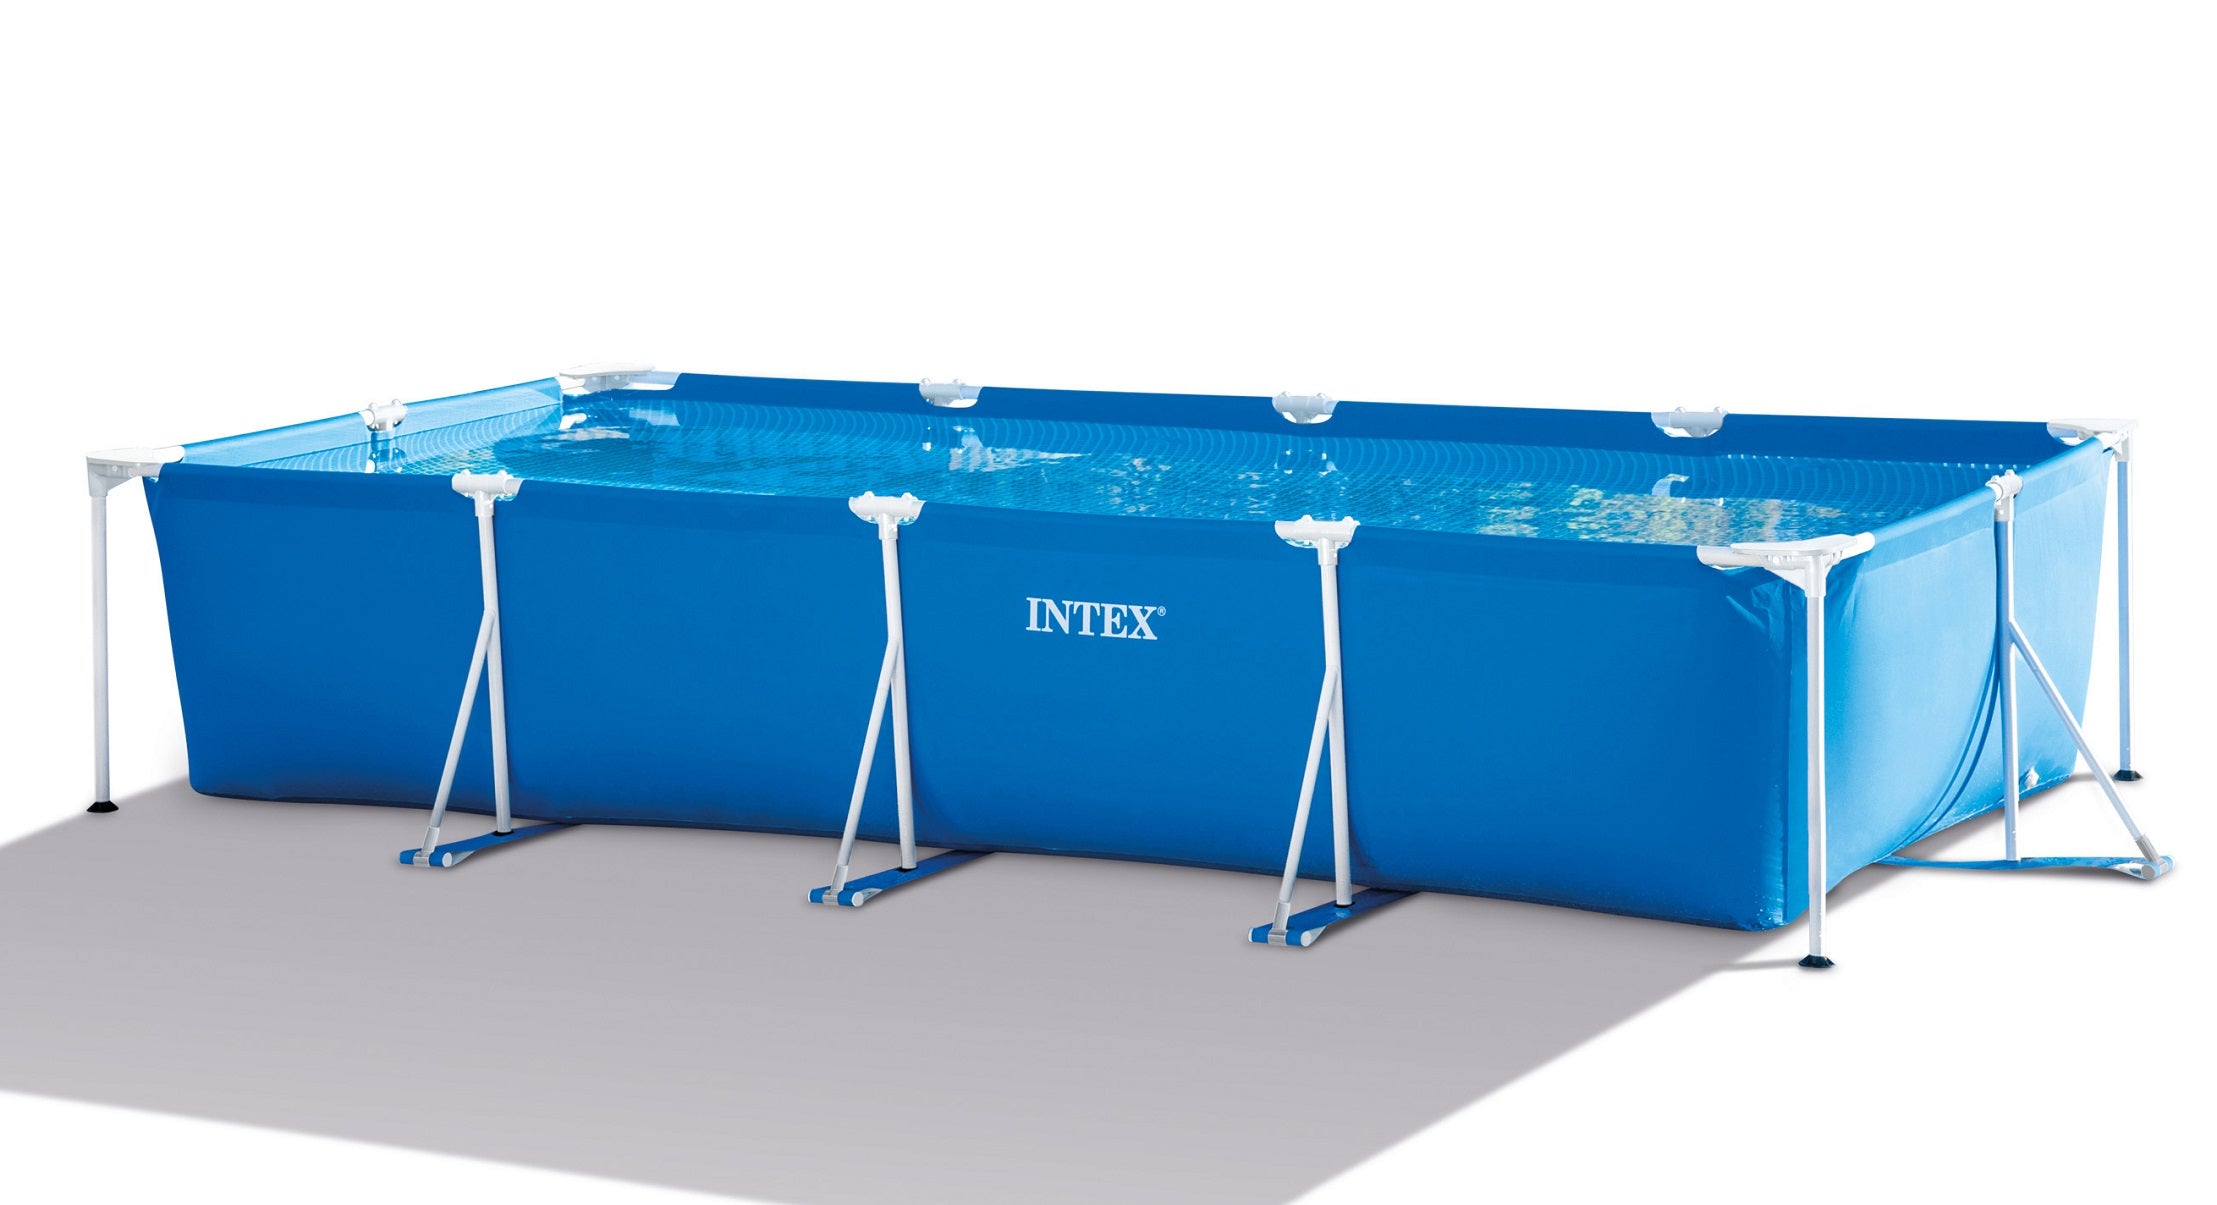 Intex Rectangular Frame Above Ground Pool Set with Pump 14ft 9.25in x 7ft 2 5/8in x 33in